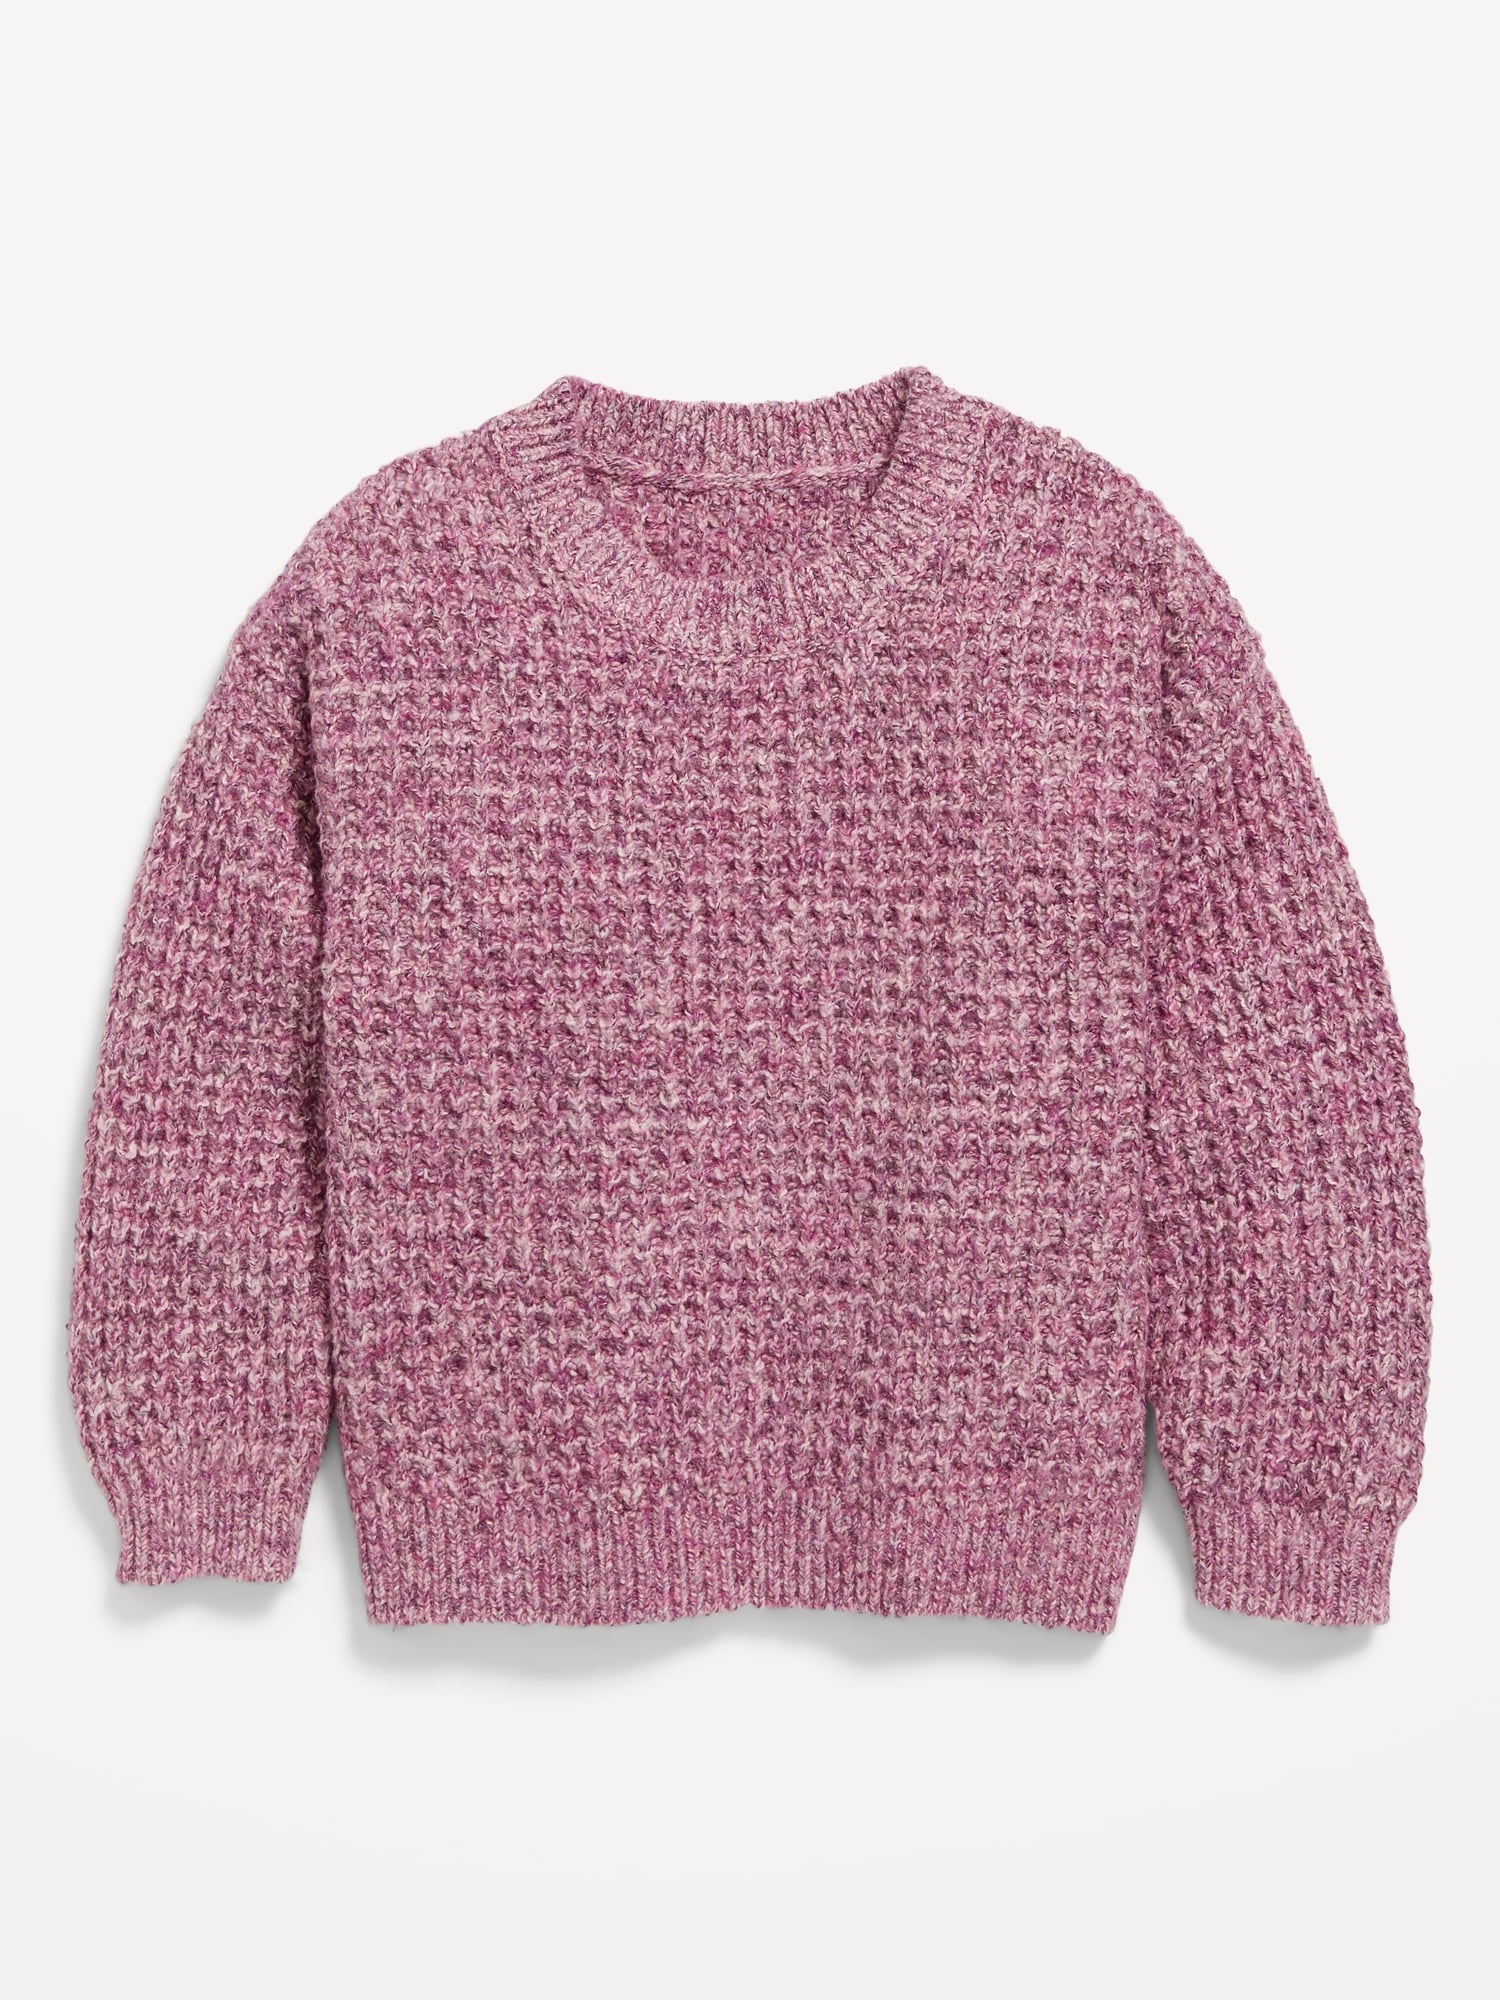 Long-Sleeve Waffle-Stitch Sweater for Toddler Girls | Old Navy